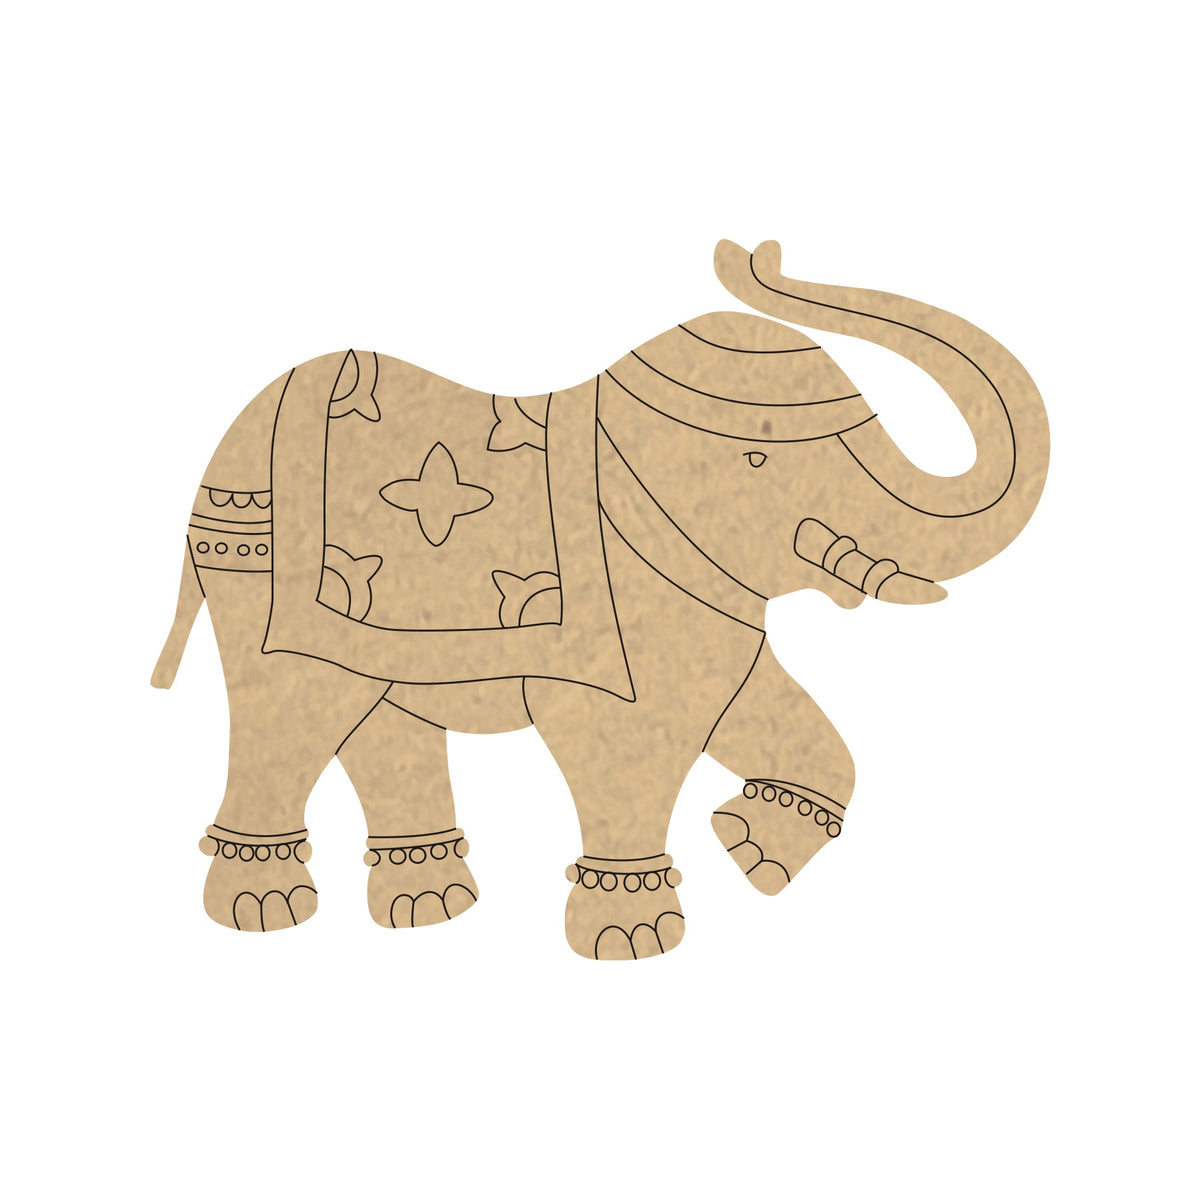 PAPERICIOUS 4mm thick Pre Marked MDF Base Ethnic Elephant